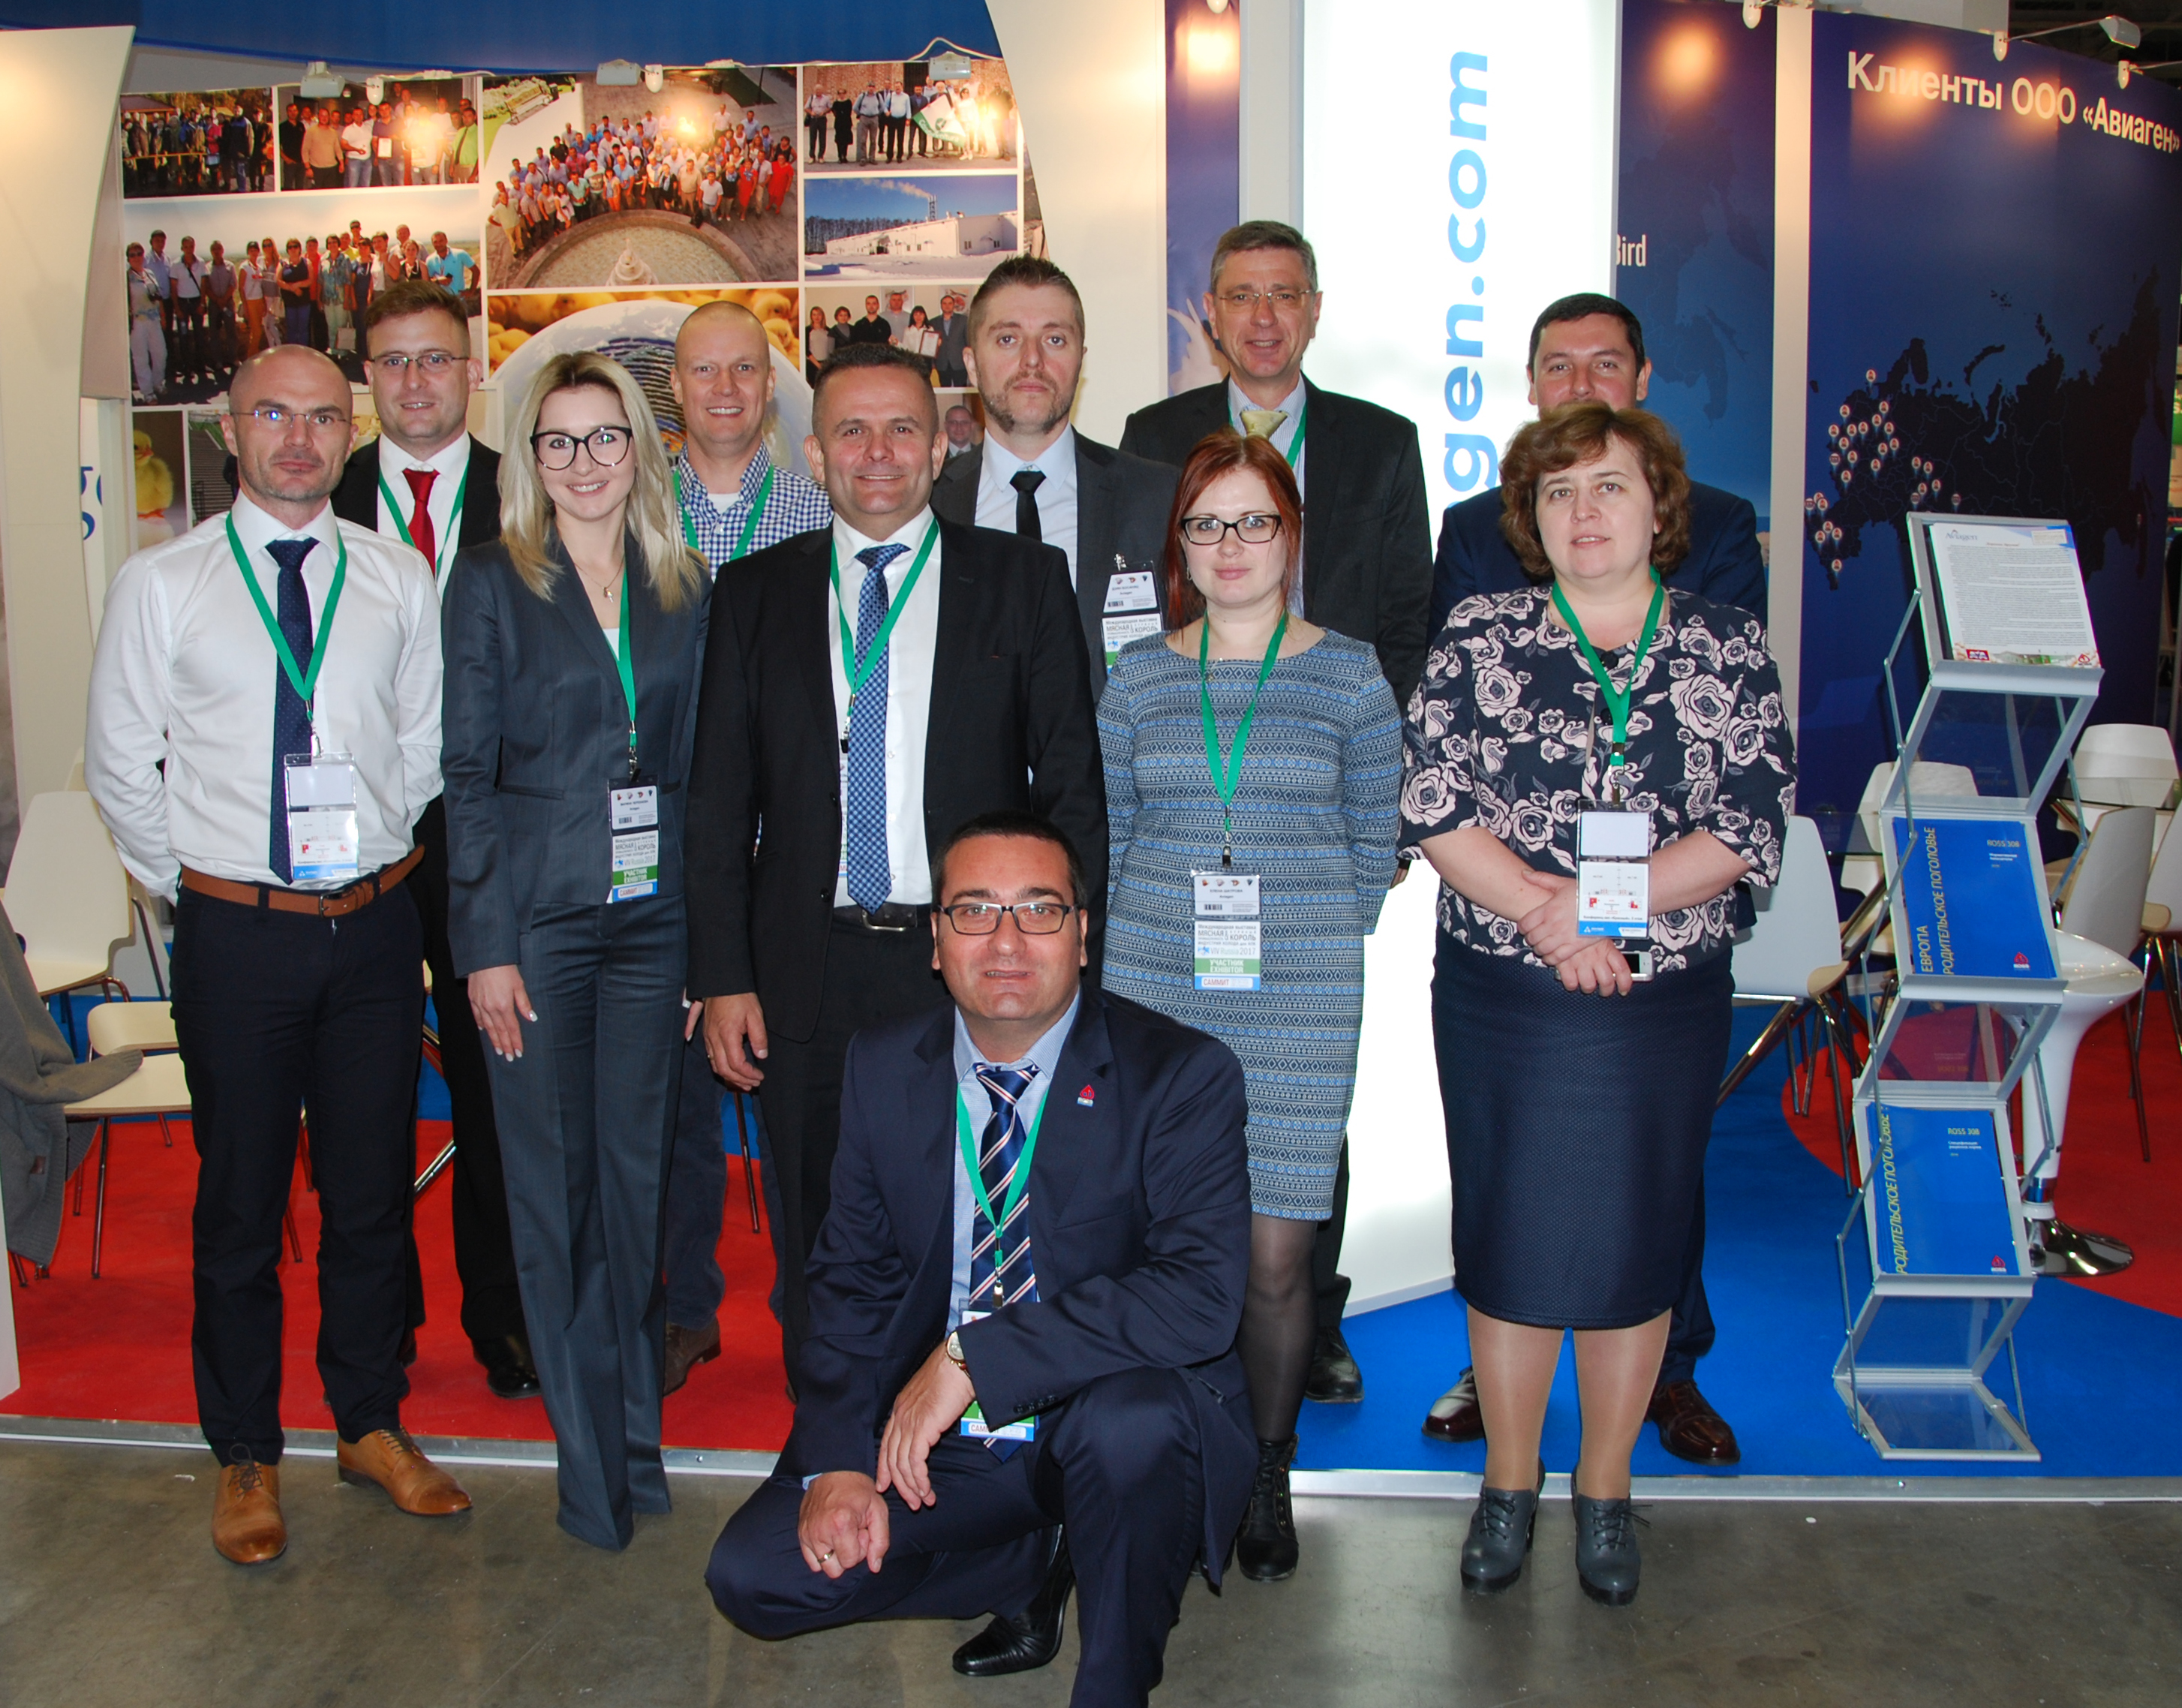 The Aviagen team will give guests a warm welcome at Meat and Poultry Industry 2019